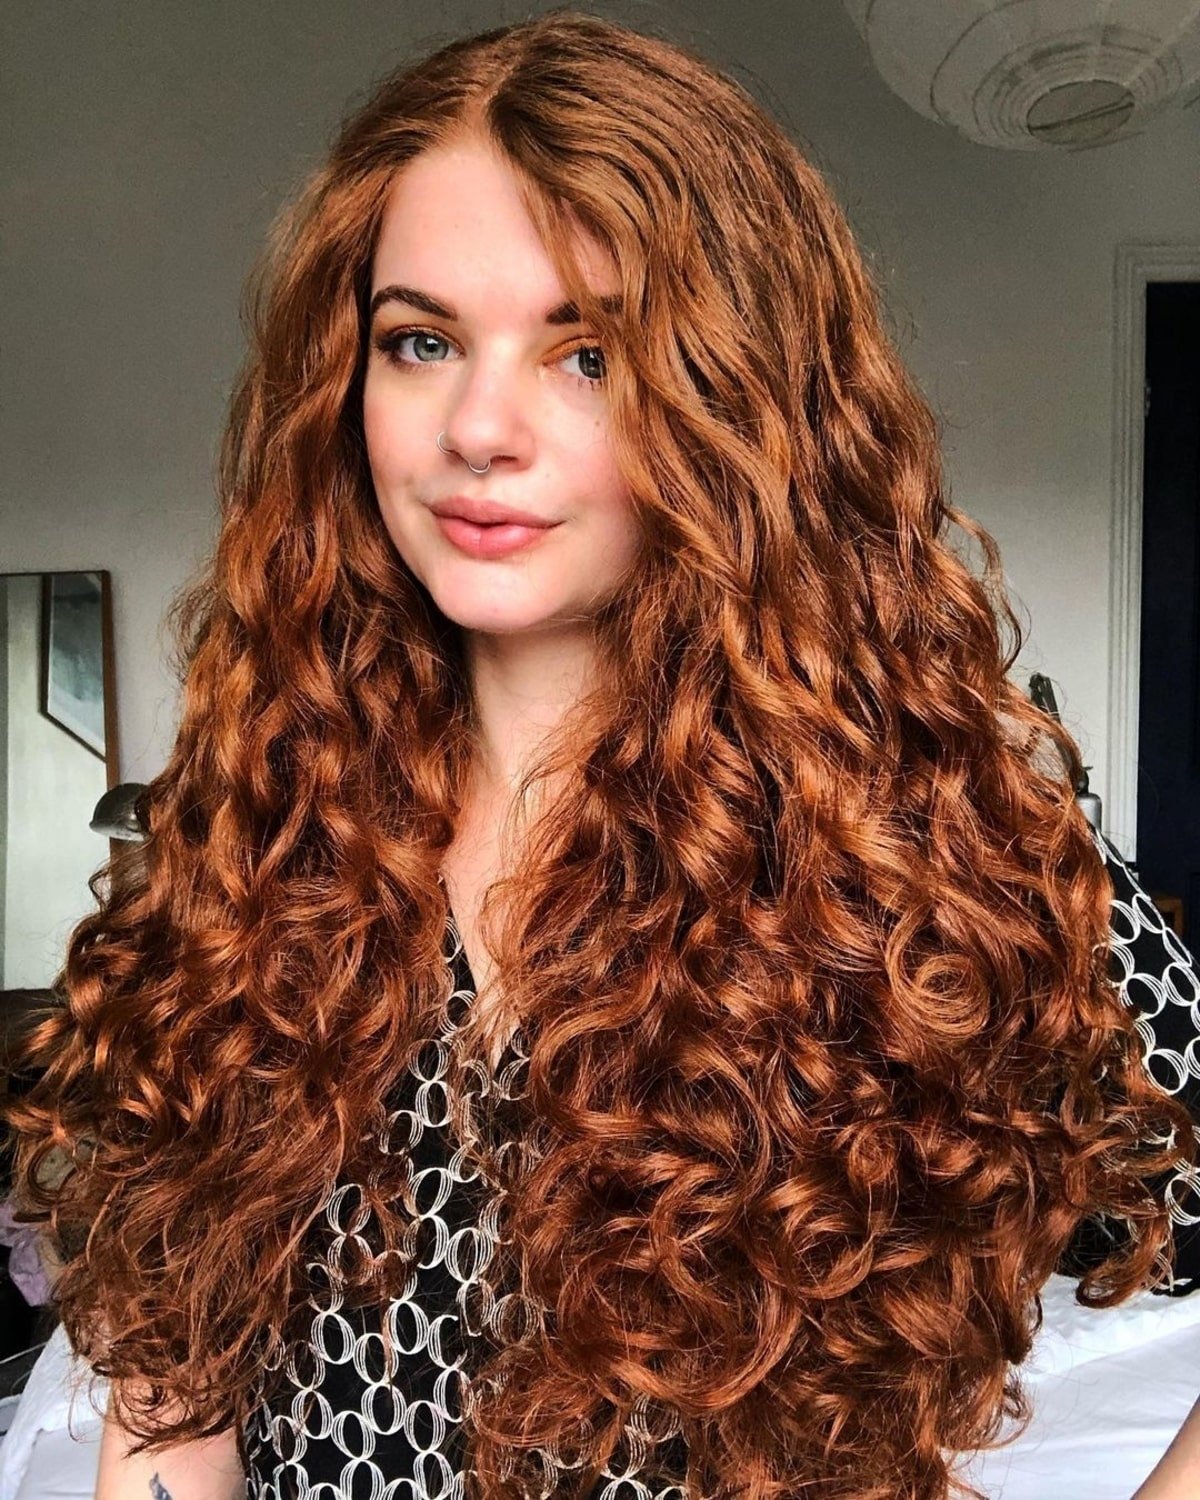 Long red curly hairstyle with large curls